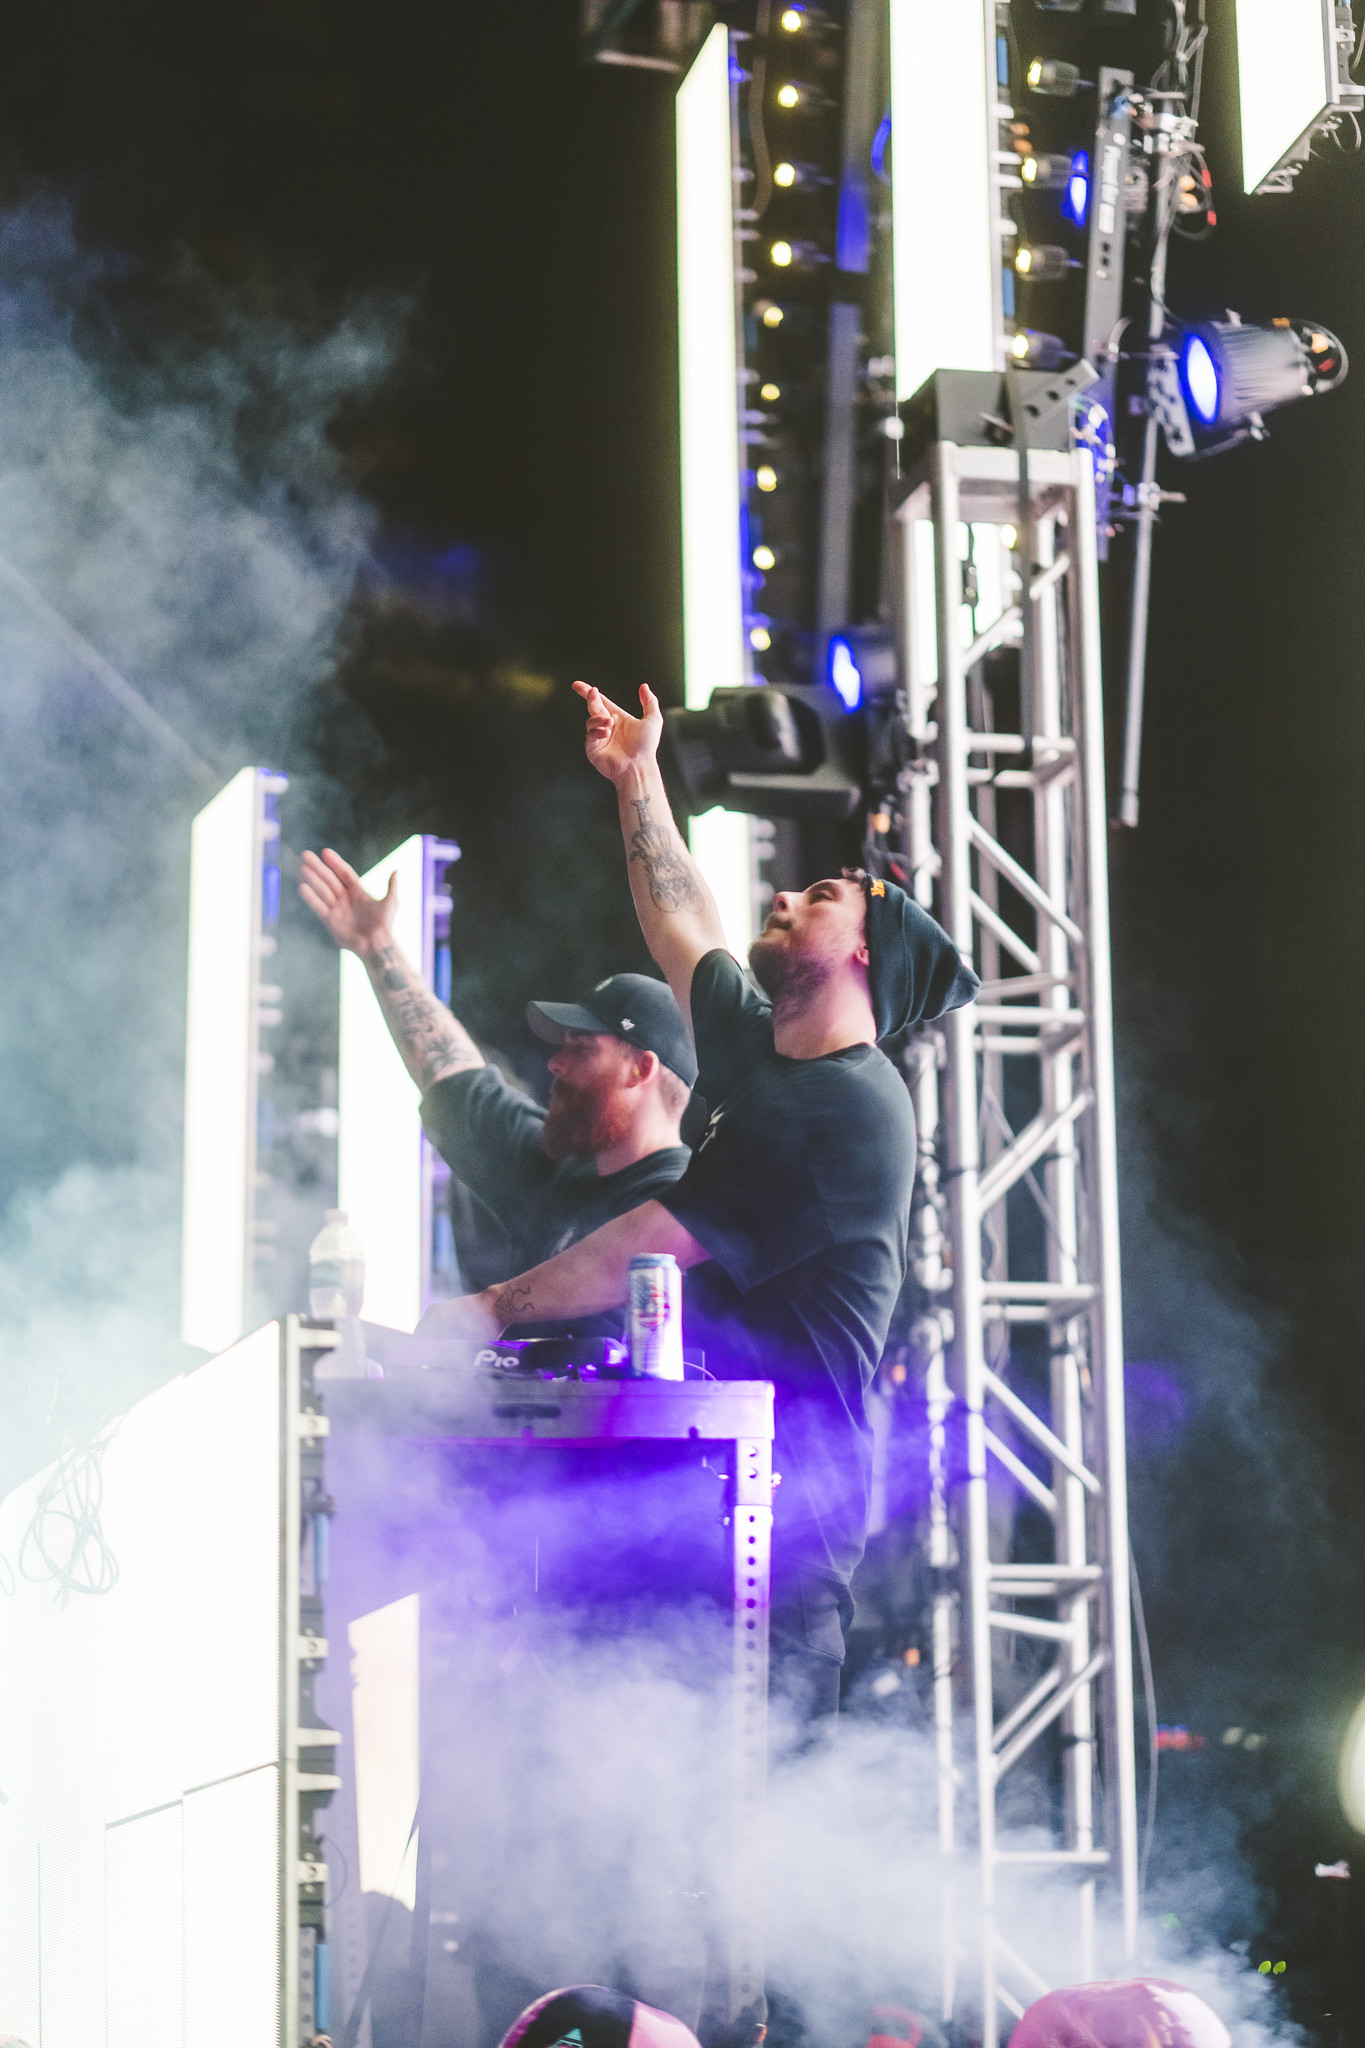 EDM duo Adventure Club on stage at Summer Fest 2022